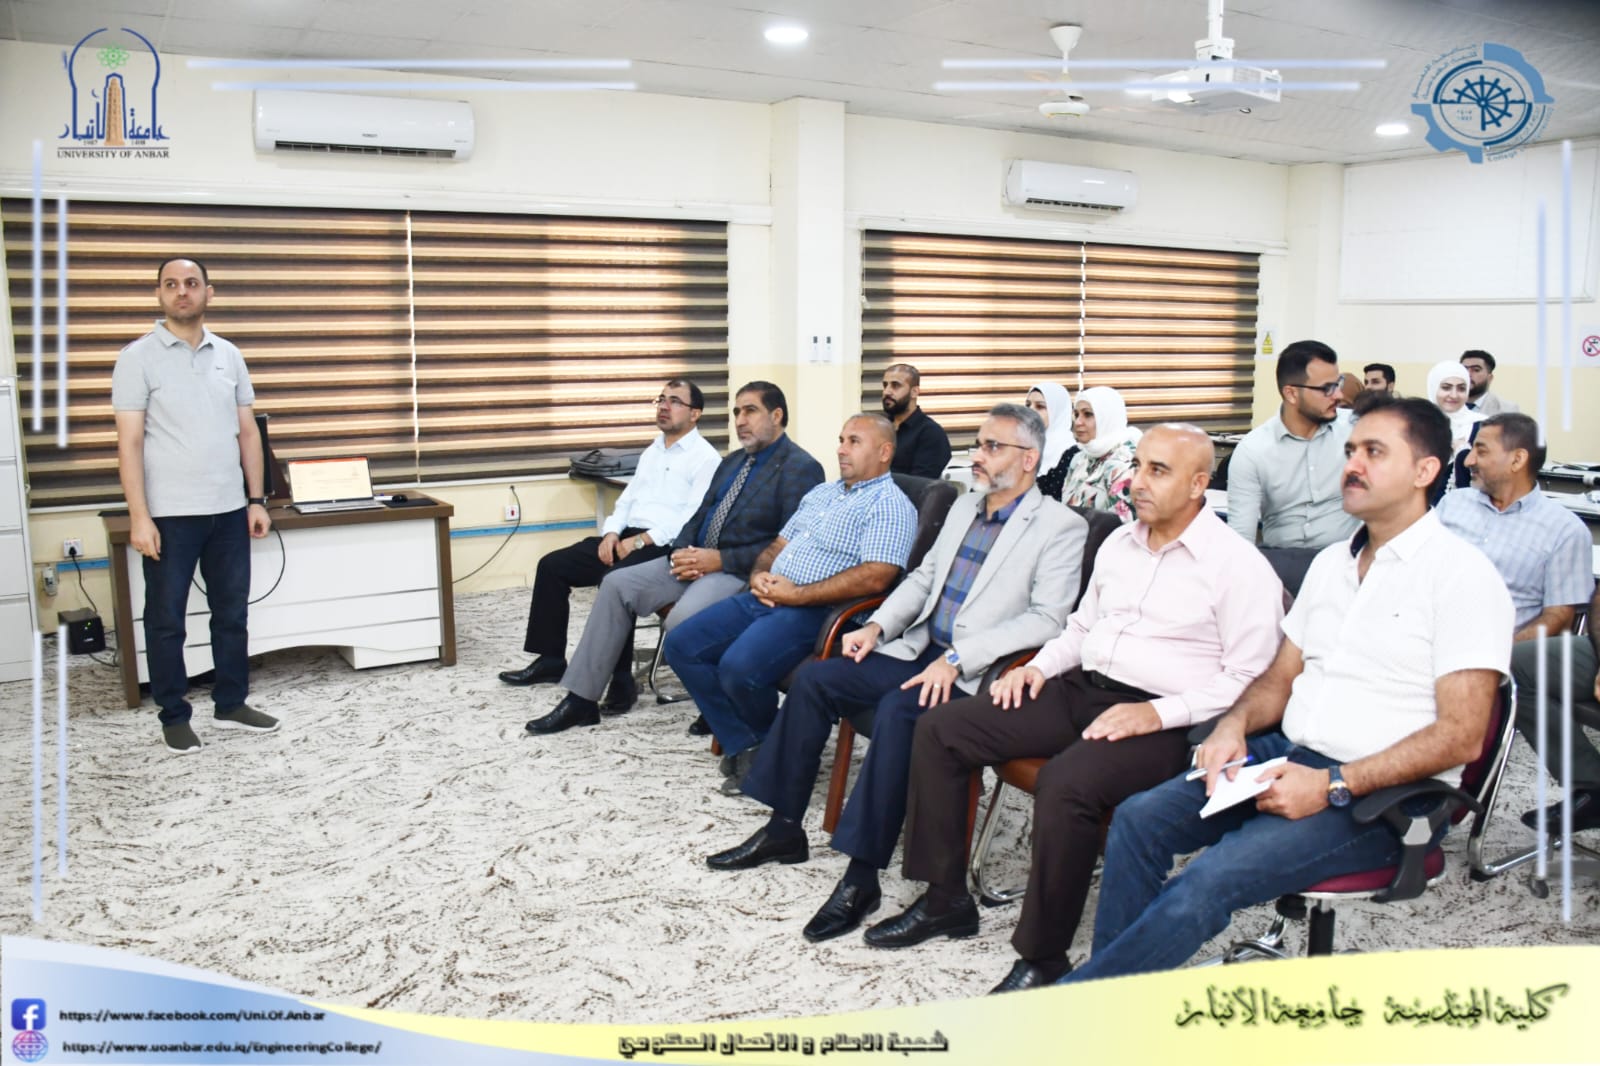  A seminar for graduate students in the Department of Mechanical Engineering - College of Engineering - Anbar University